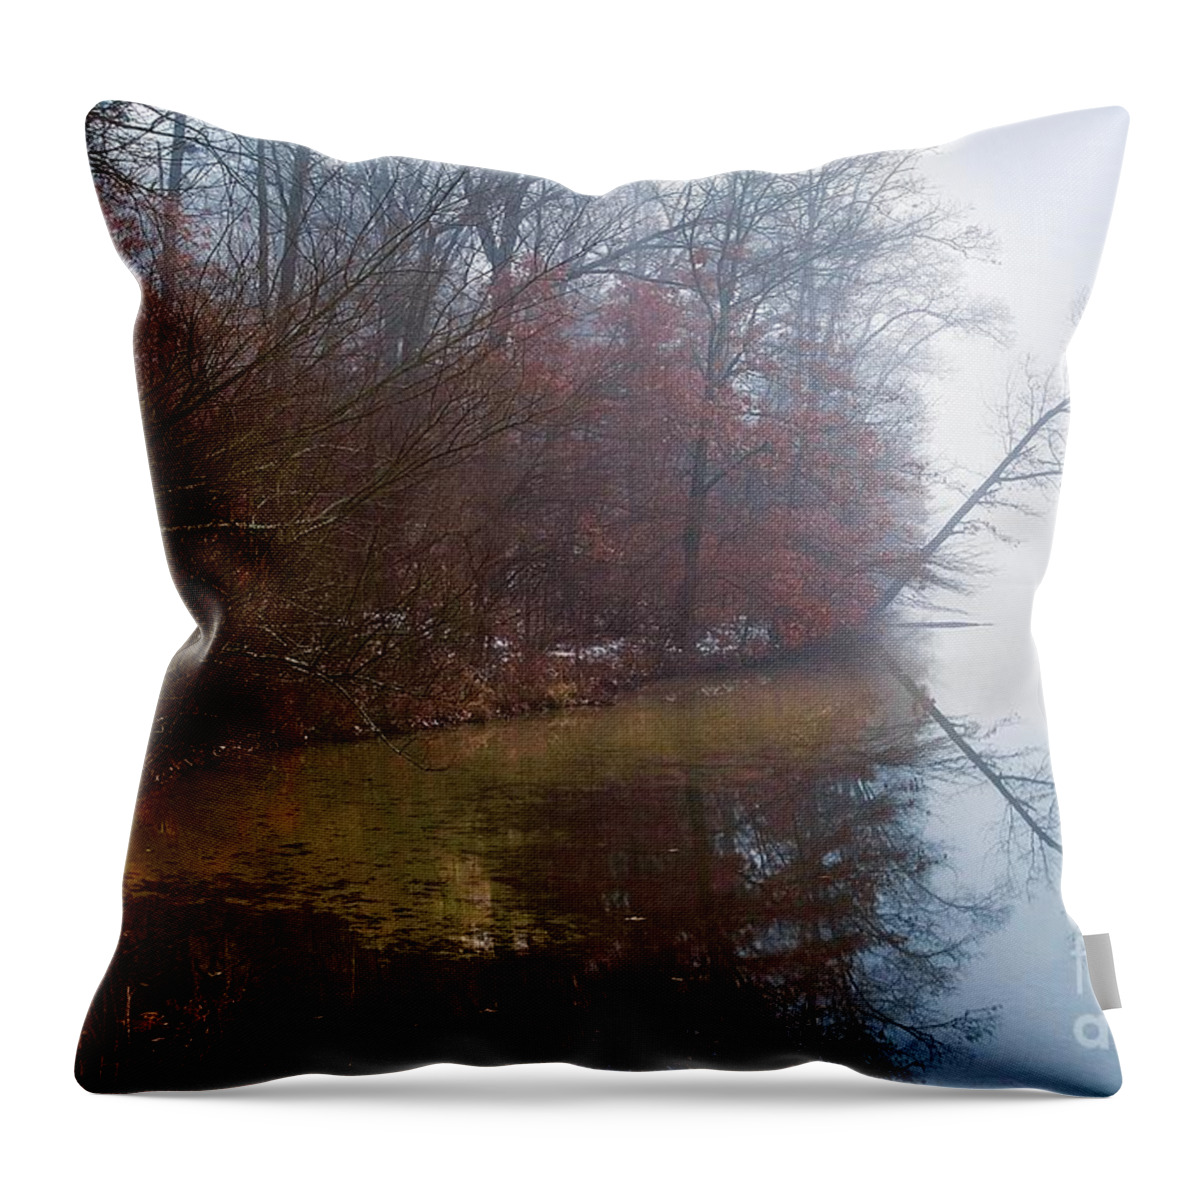 Mist Throw Pillow featuring the photograph Eagle Lake Reflection by Randy Pollard